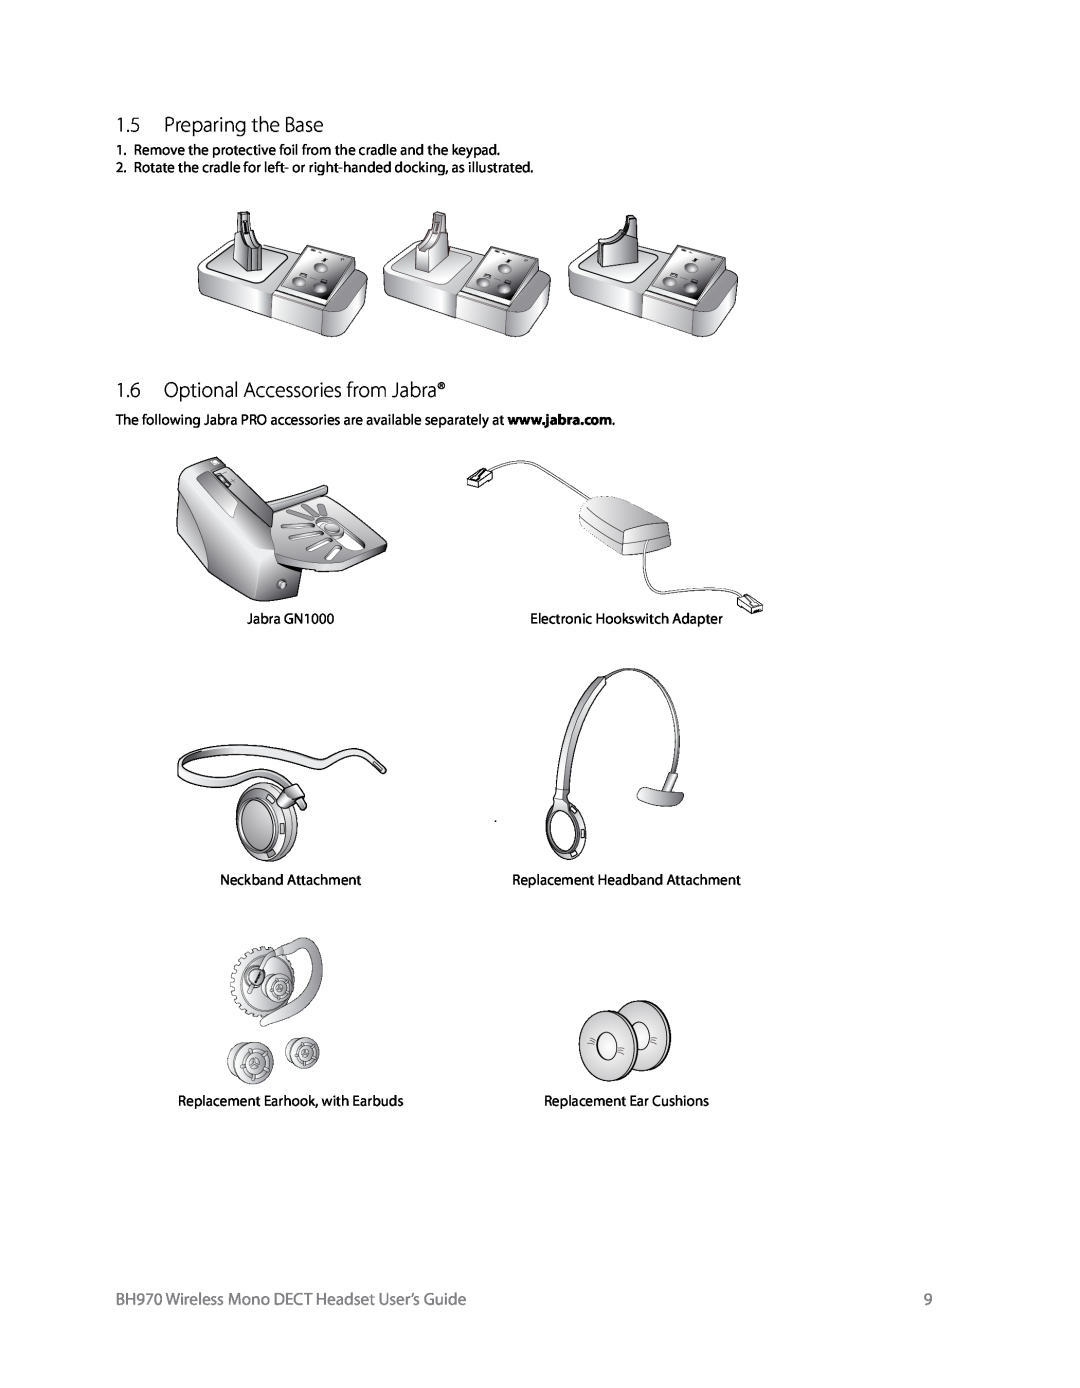 Logitech manual 1.5Preparing the Base, 1.6Optional Accessories from Jabra, BH970 Wireless Mono DECT Headset User’s Guide 